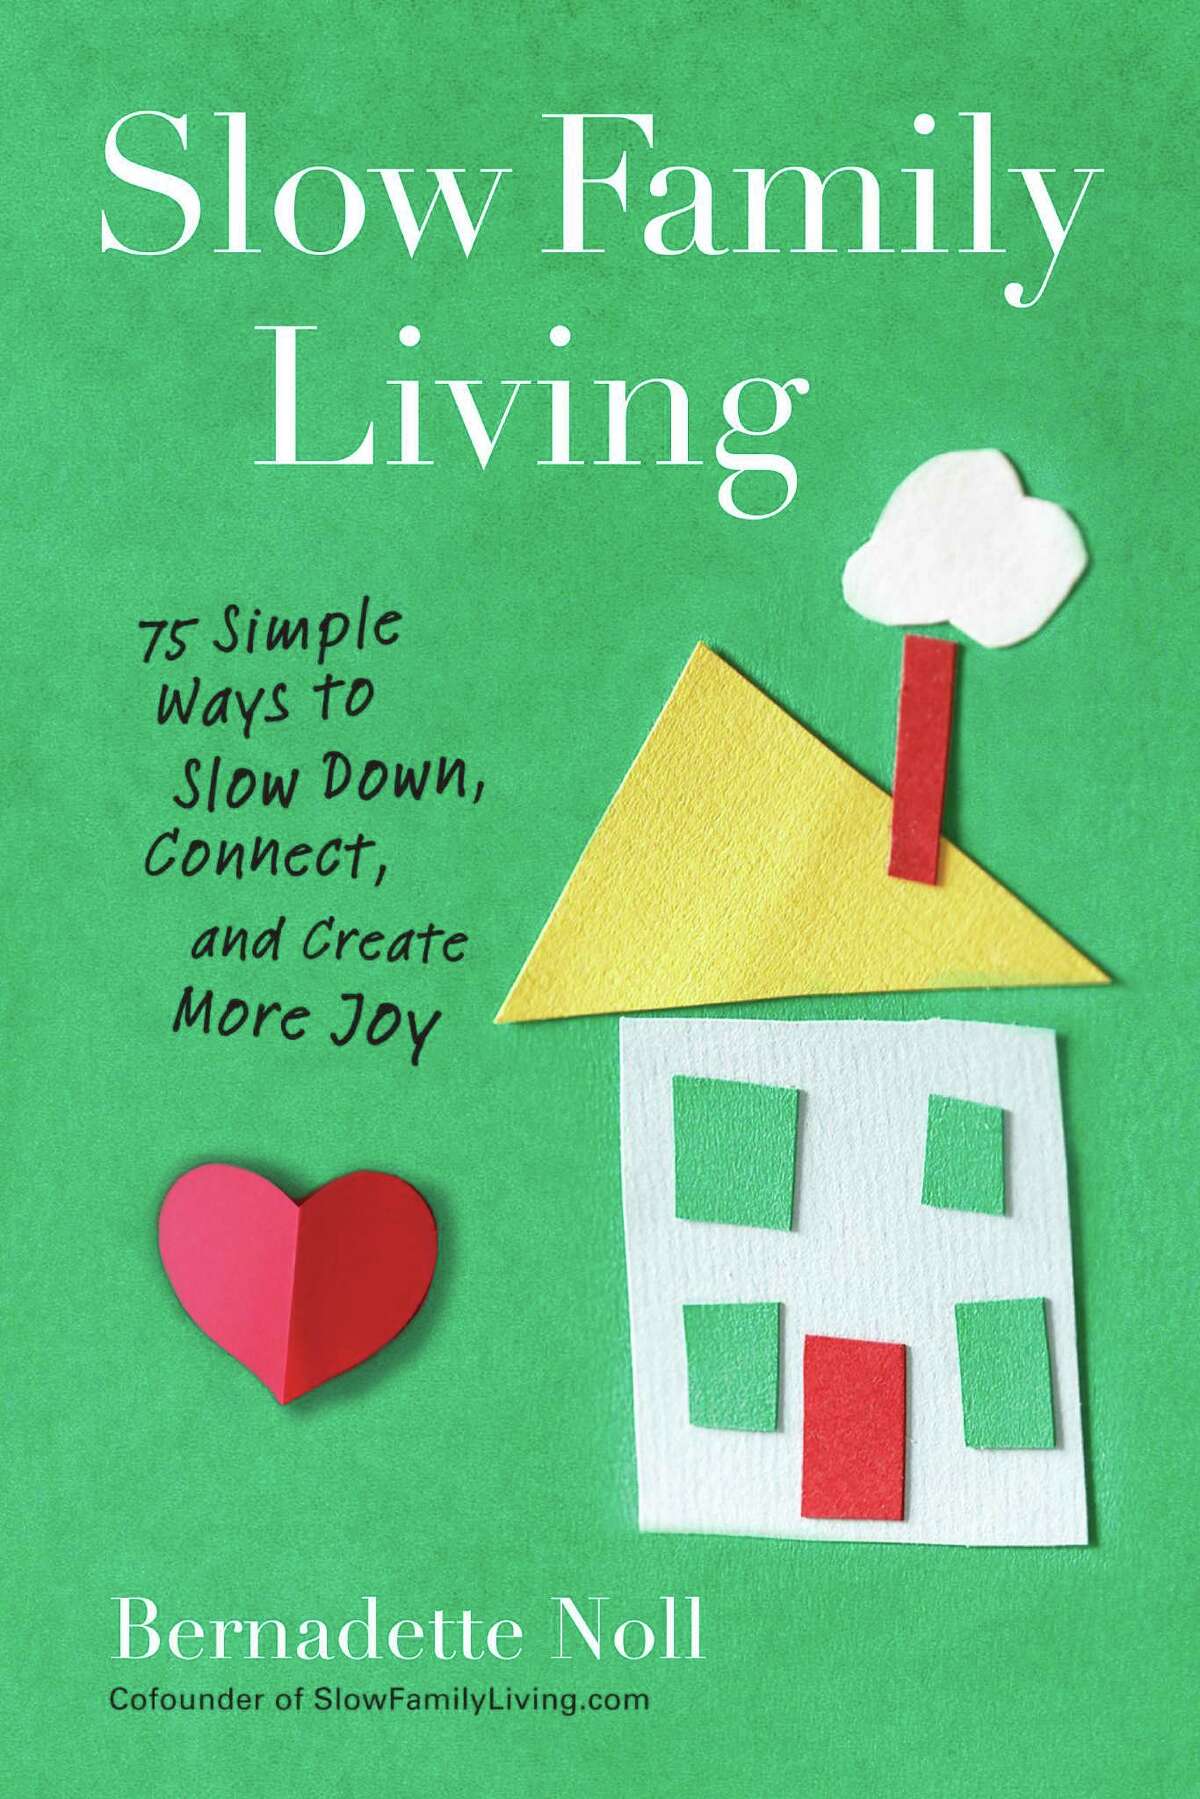 Austin author Bernadette Noll drew on personal experiences for “Slow Family Living.”